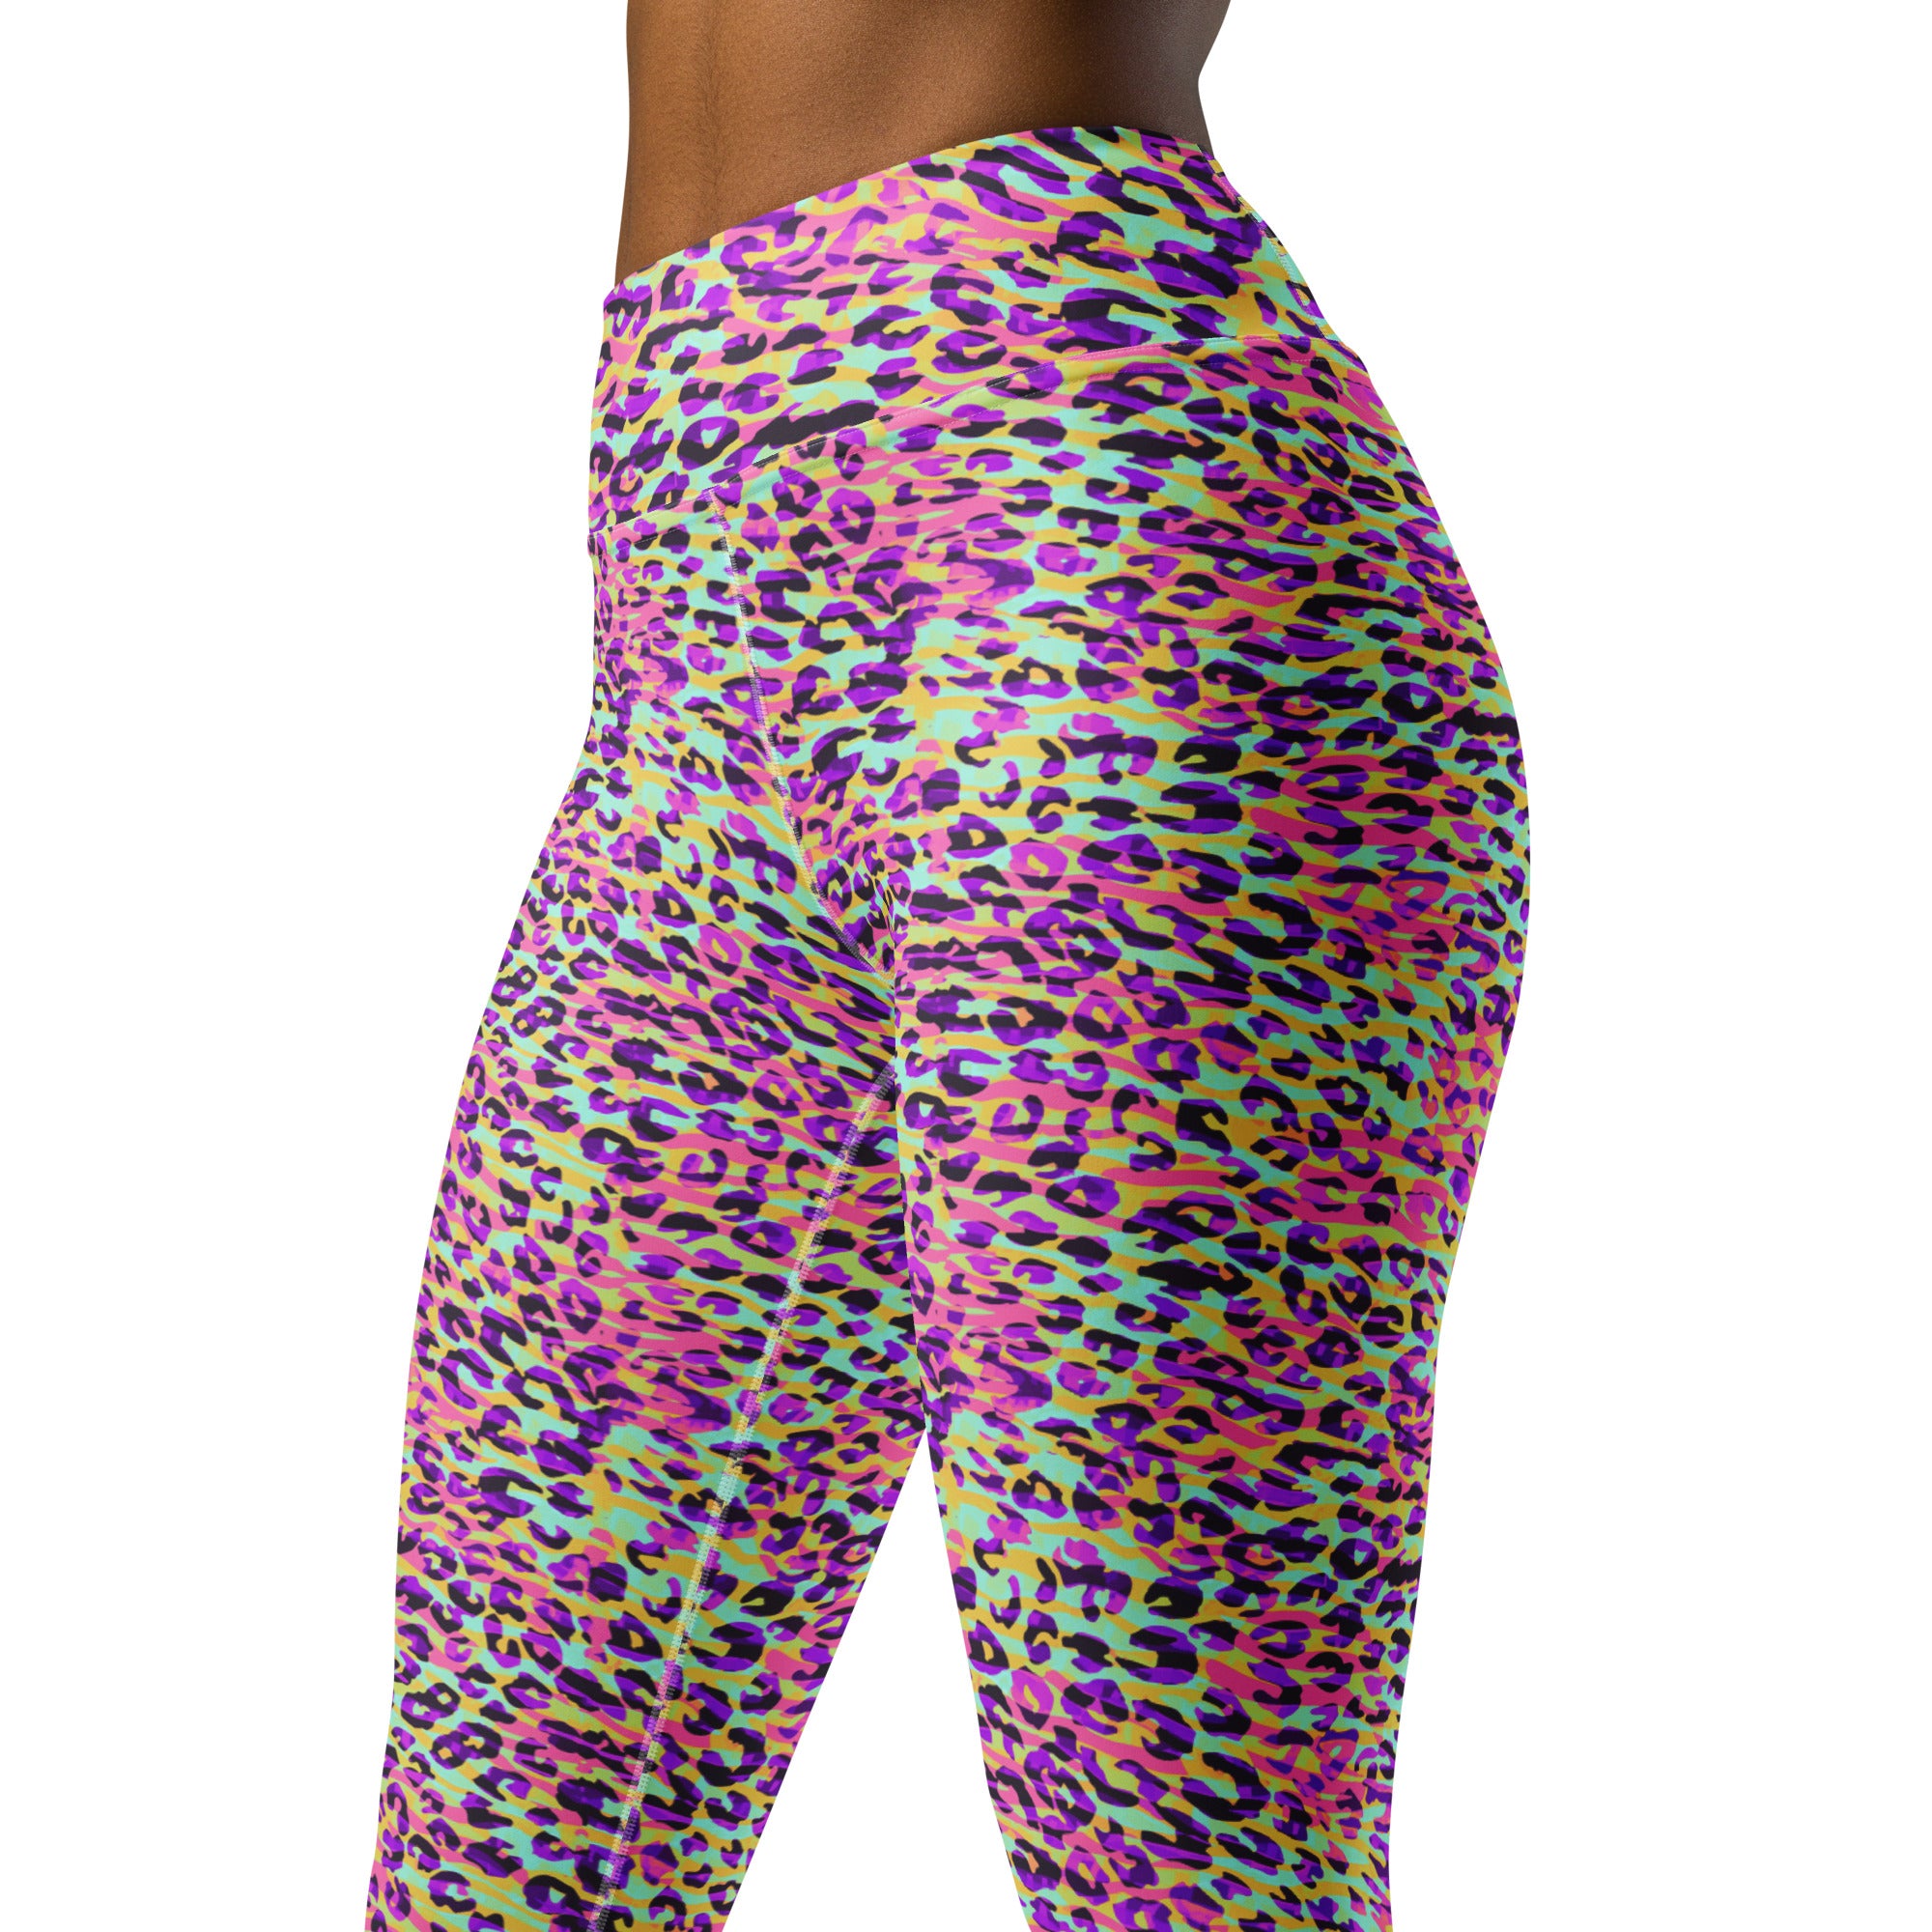 Yoga Leggings- ZEBRA AND LEOPARD PRINT PINK WITH YELLOW